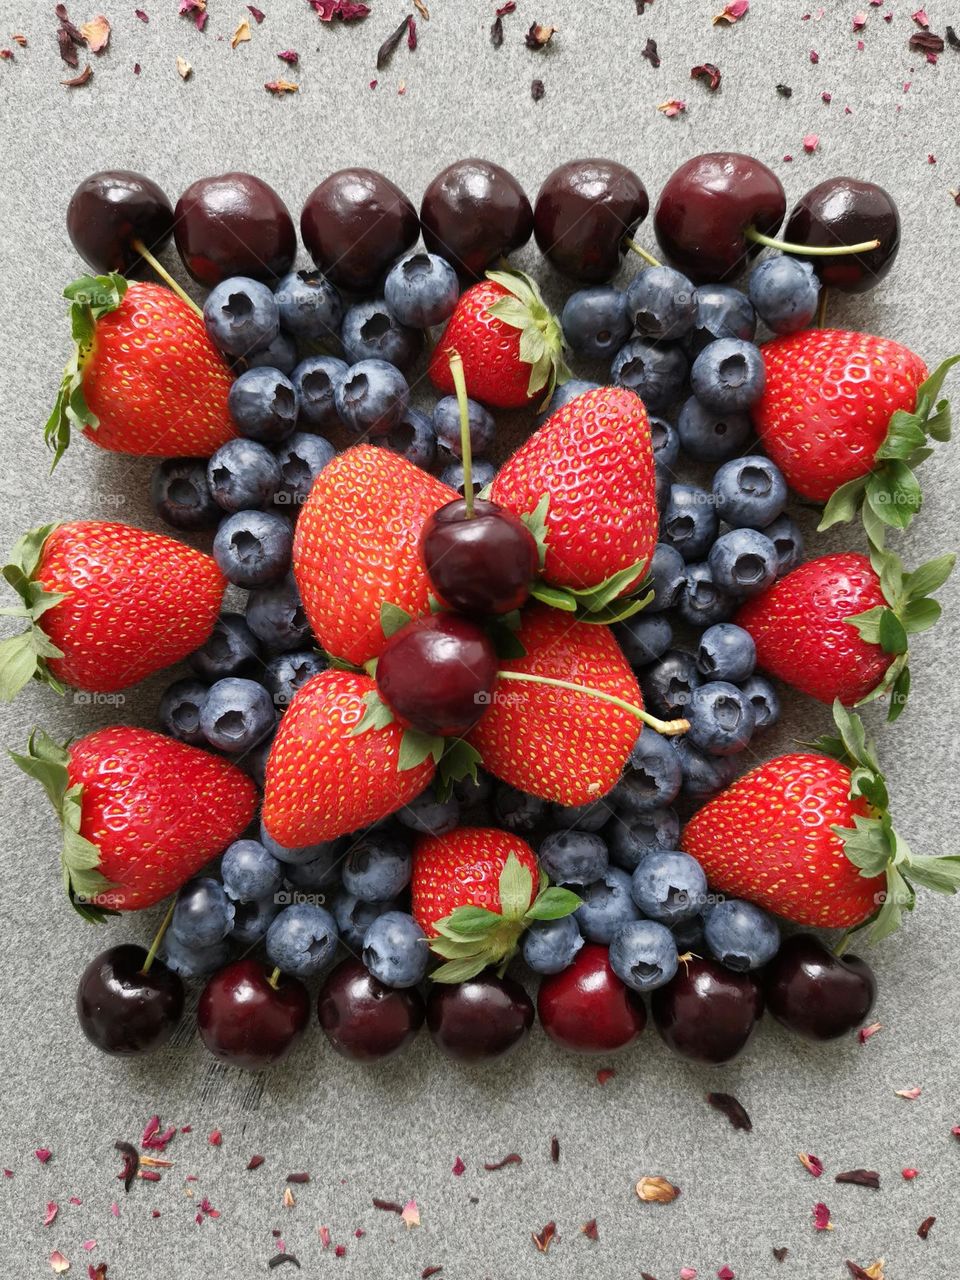 Summer time, summer mood, summer treats. Delicious and juicy summer berries. Blueberry, strawberry, cherry.